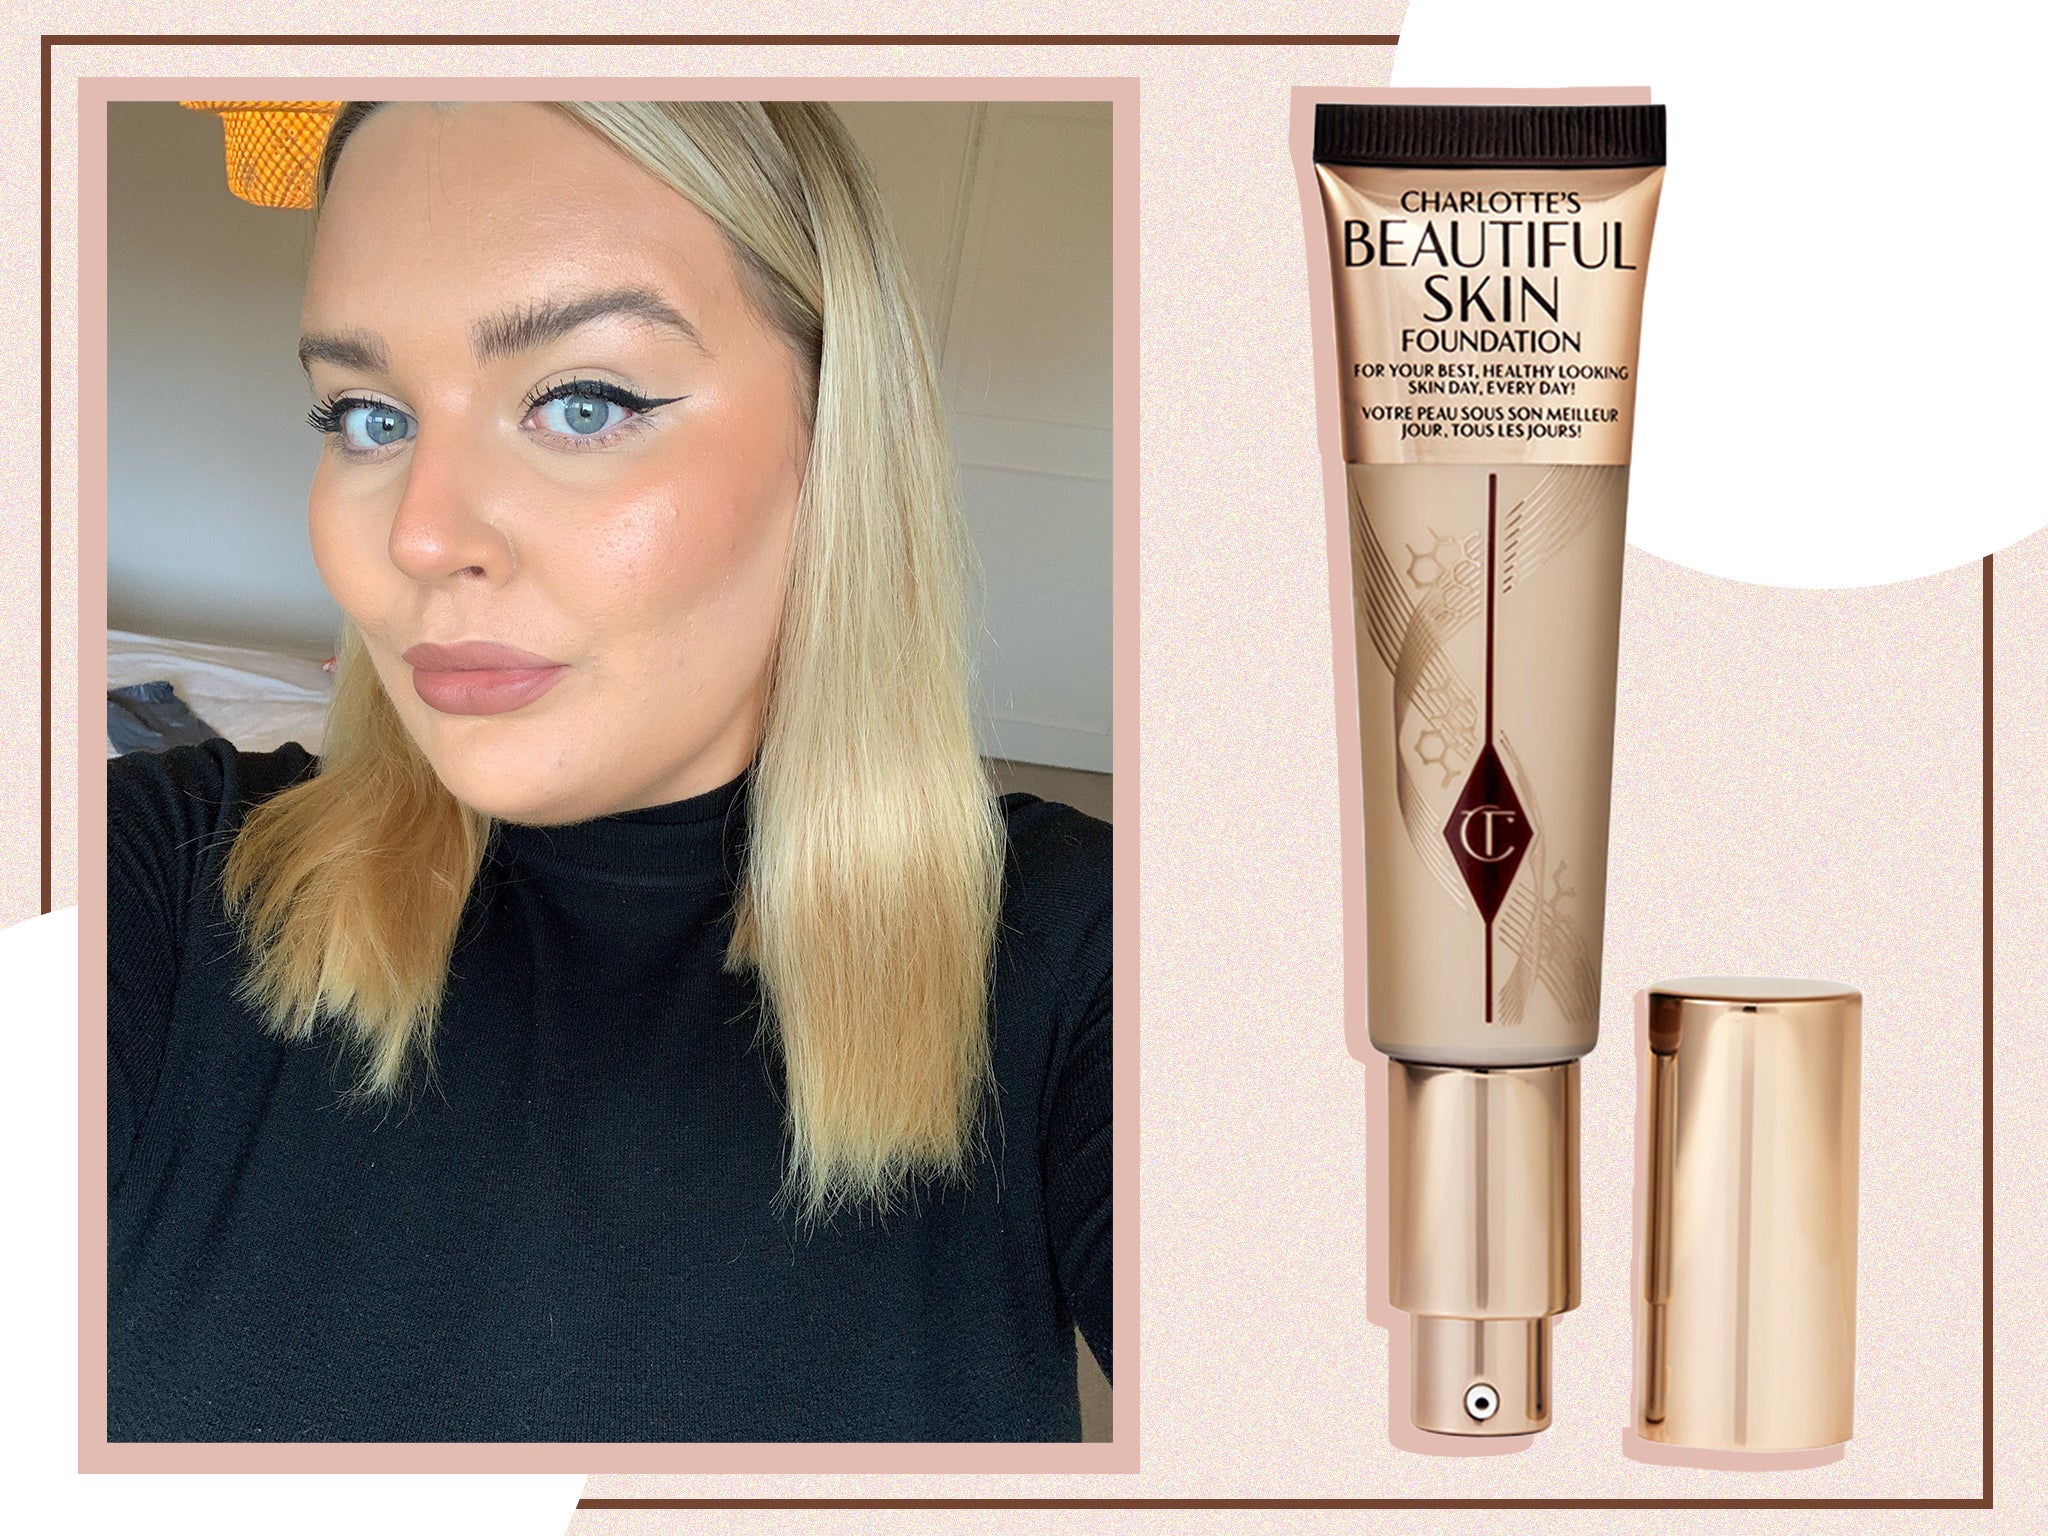 The new foundation has an almost gel-like consistency that buffs into the skin beautifully